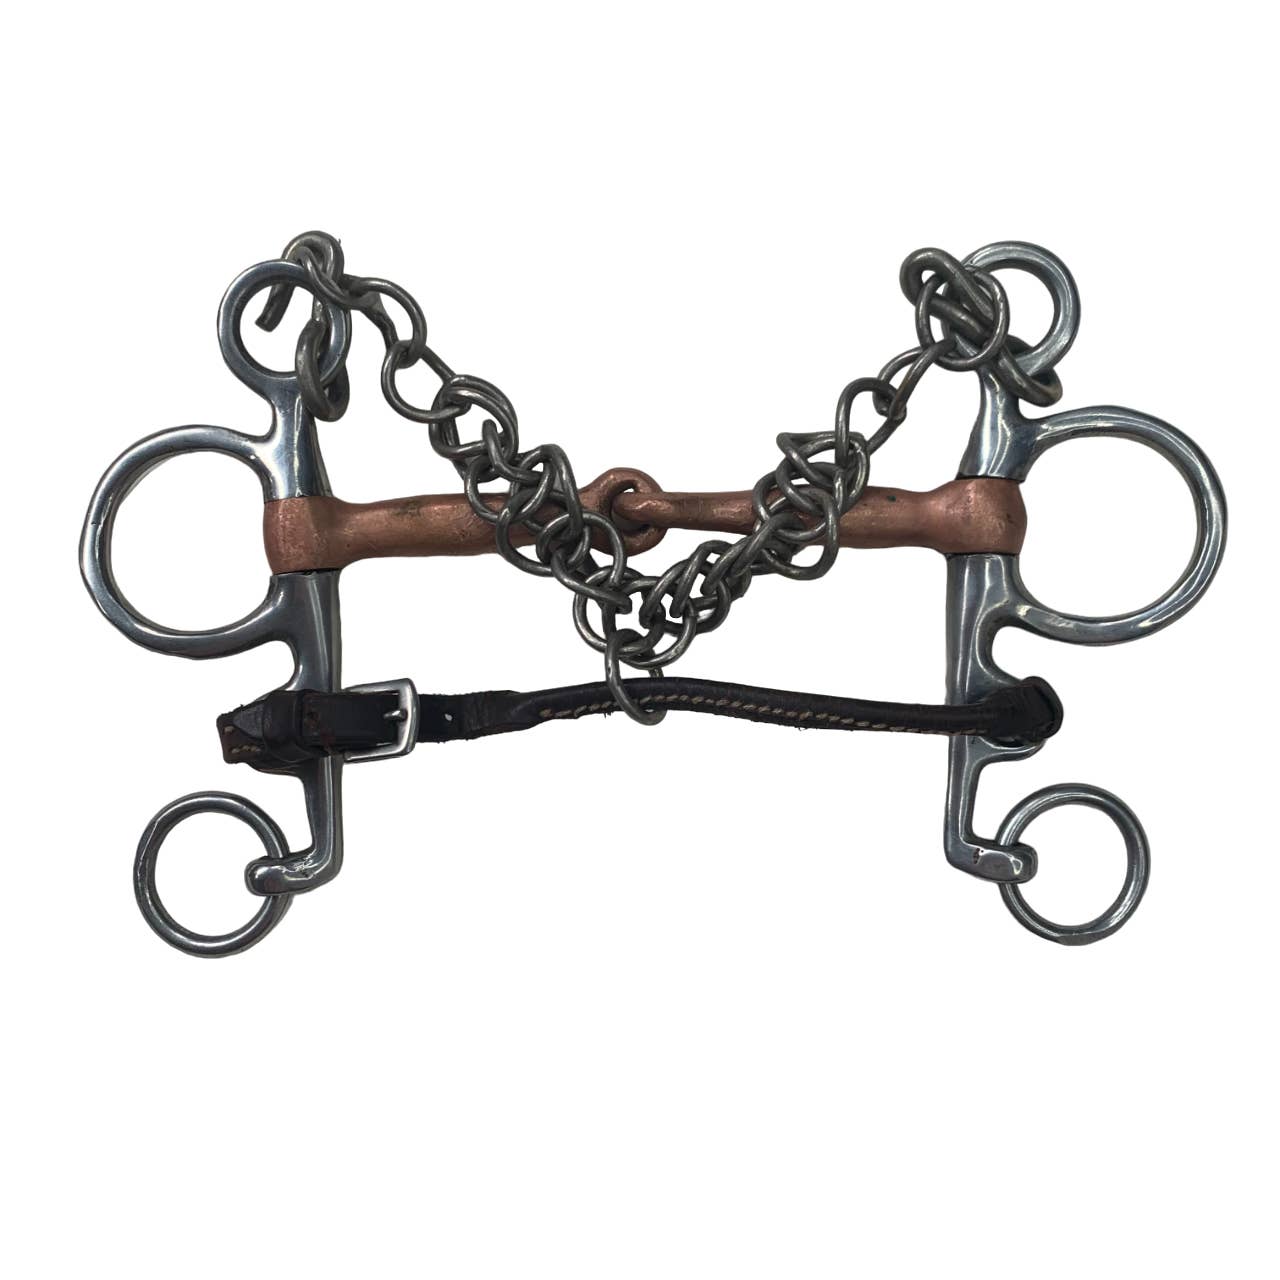 Jointed Pelham Snaffle in Copper - 5 1/4"